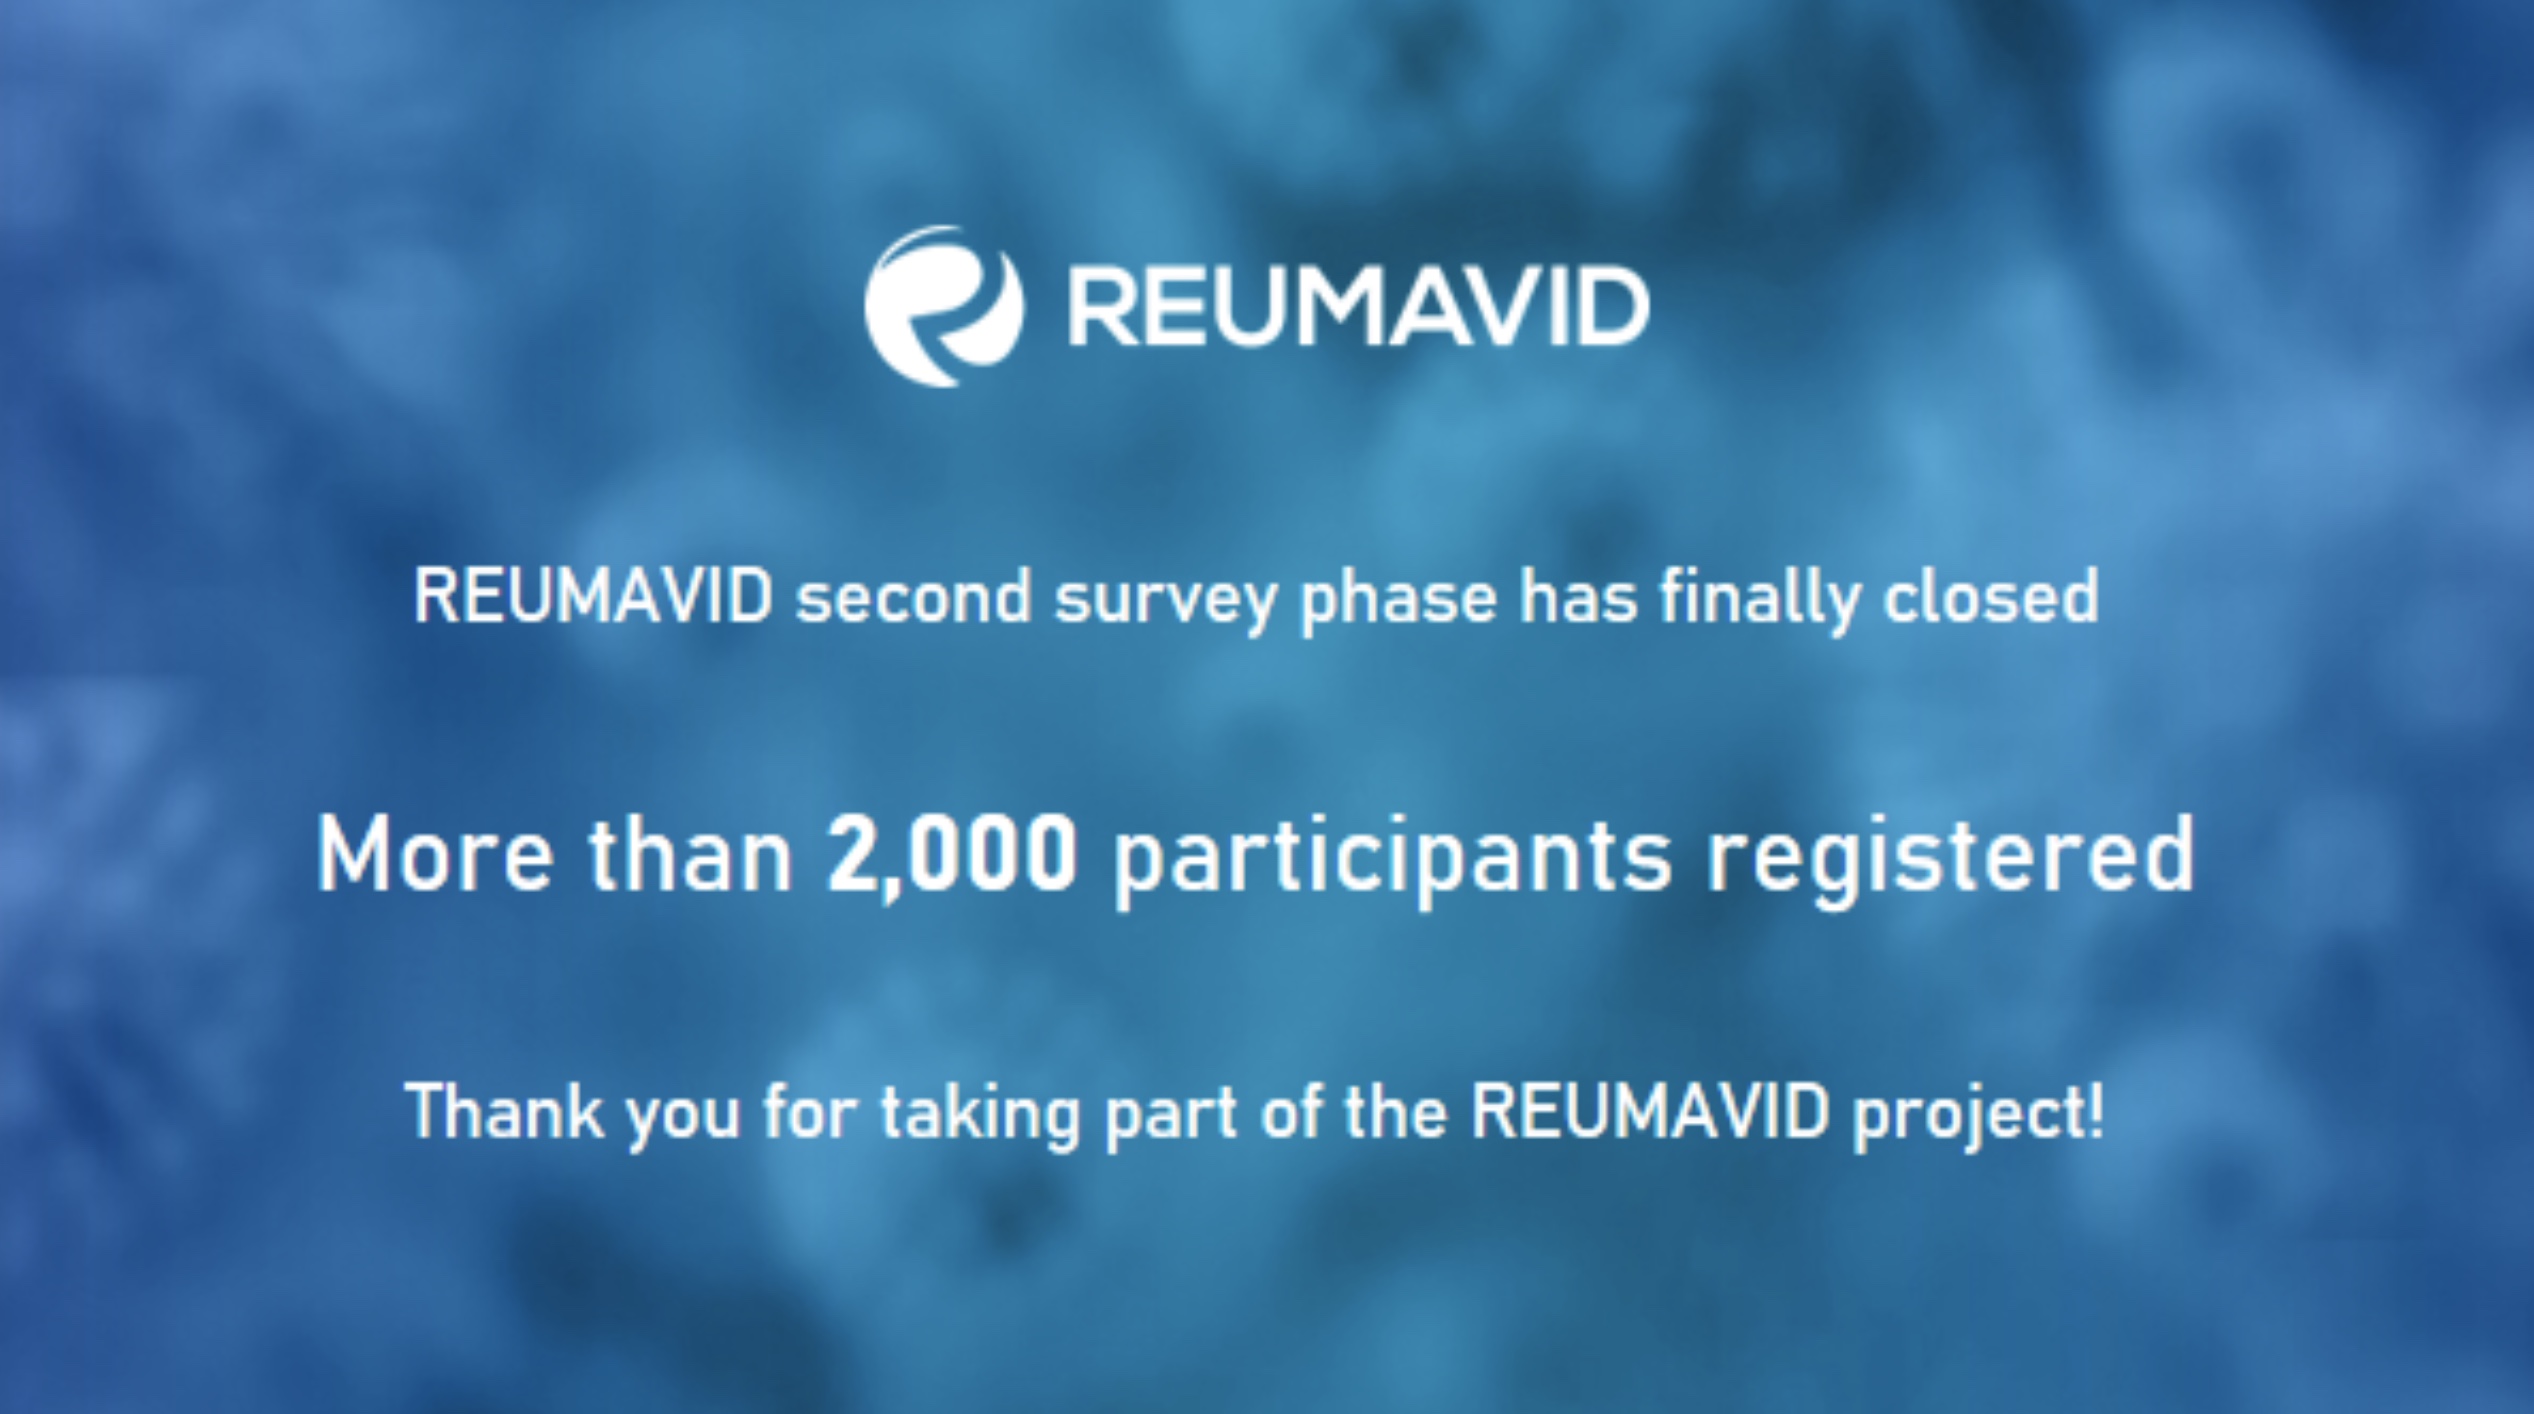 Survey period for the second phase of REUMAVID finally concluded